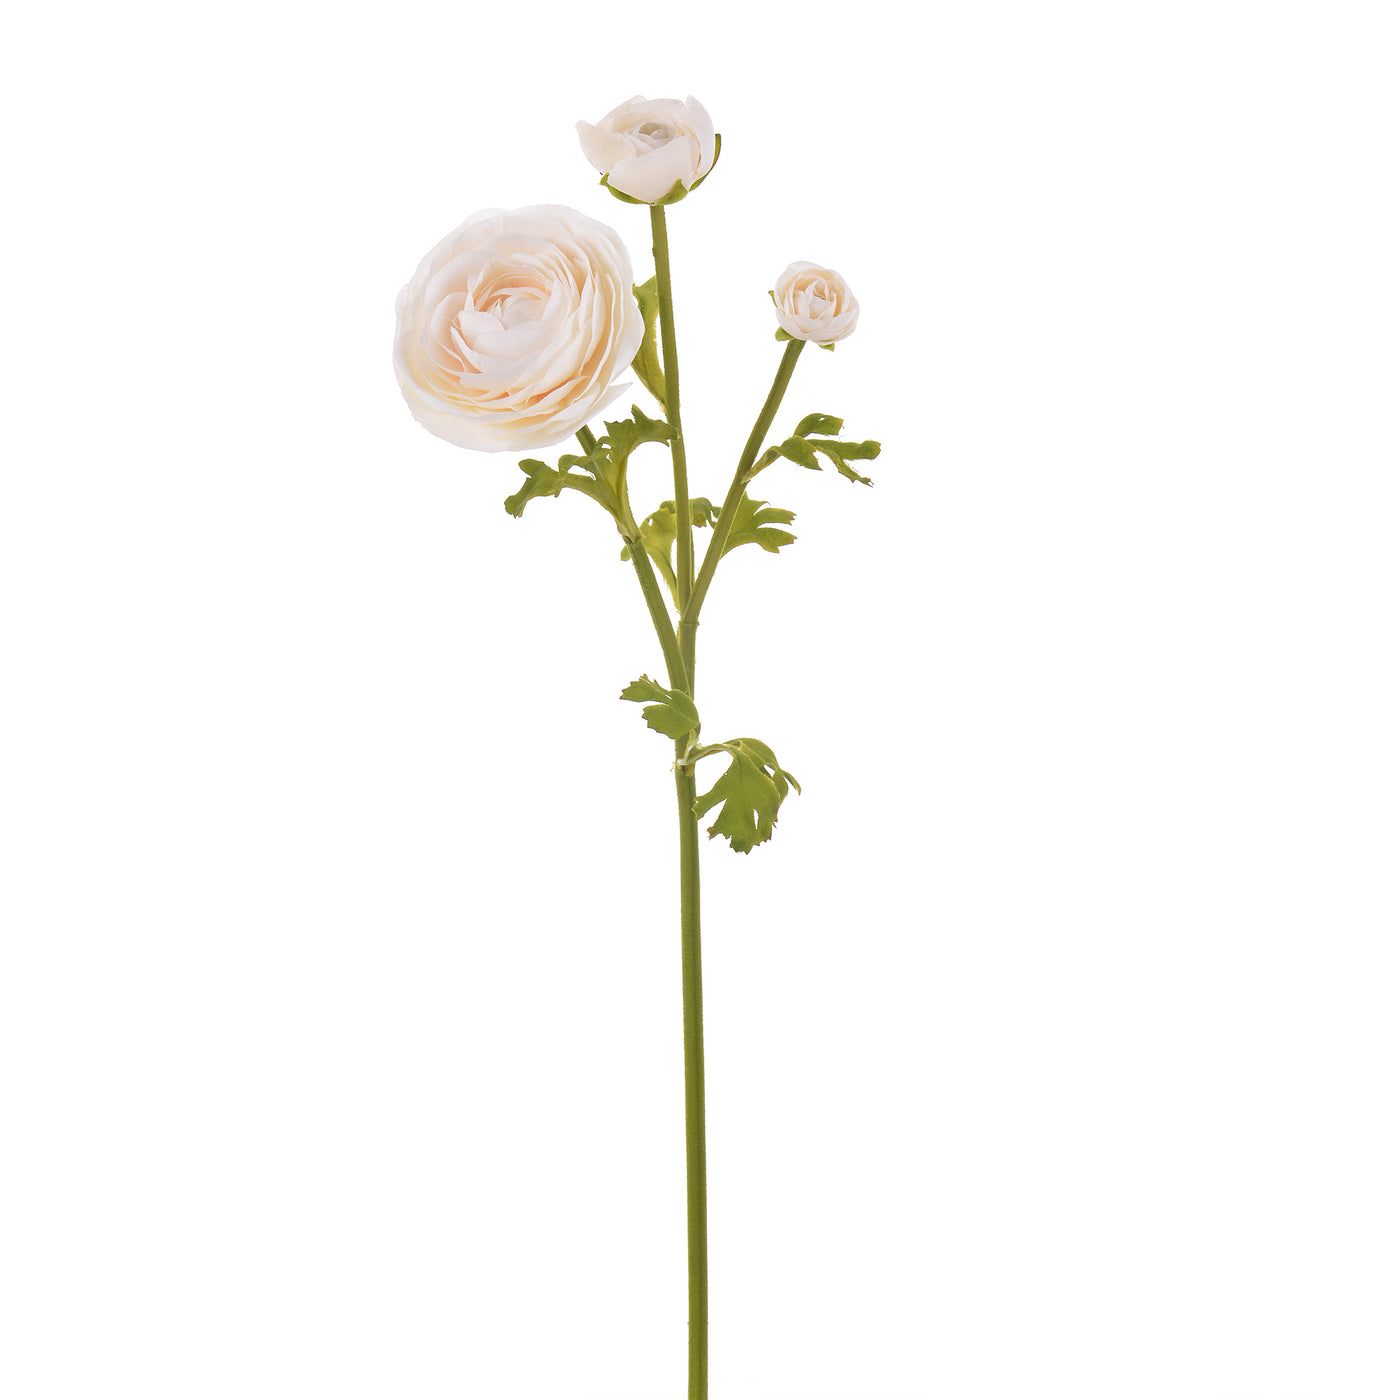 Life-like high-quality Real Touch faux ranunculus